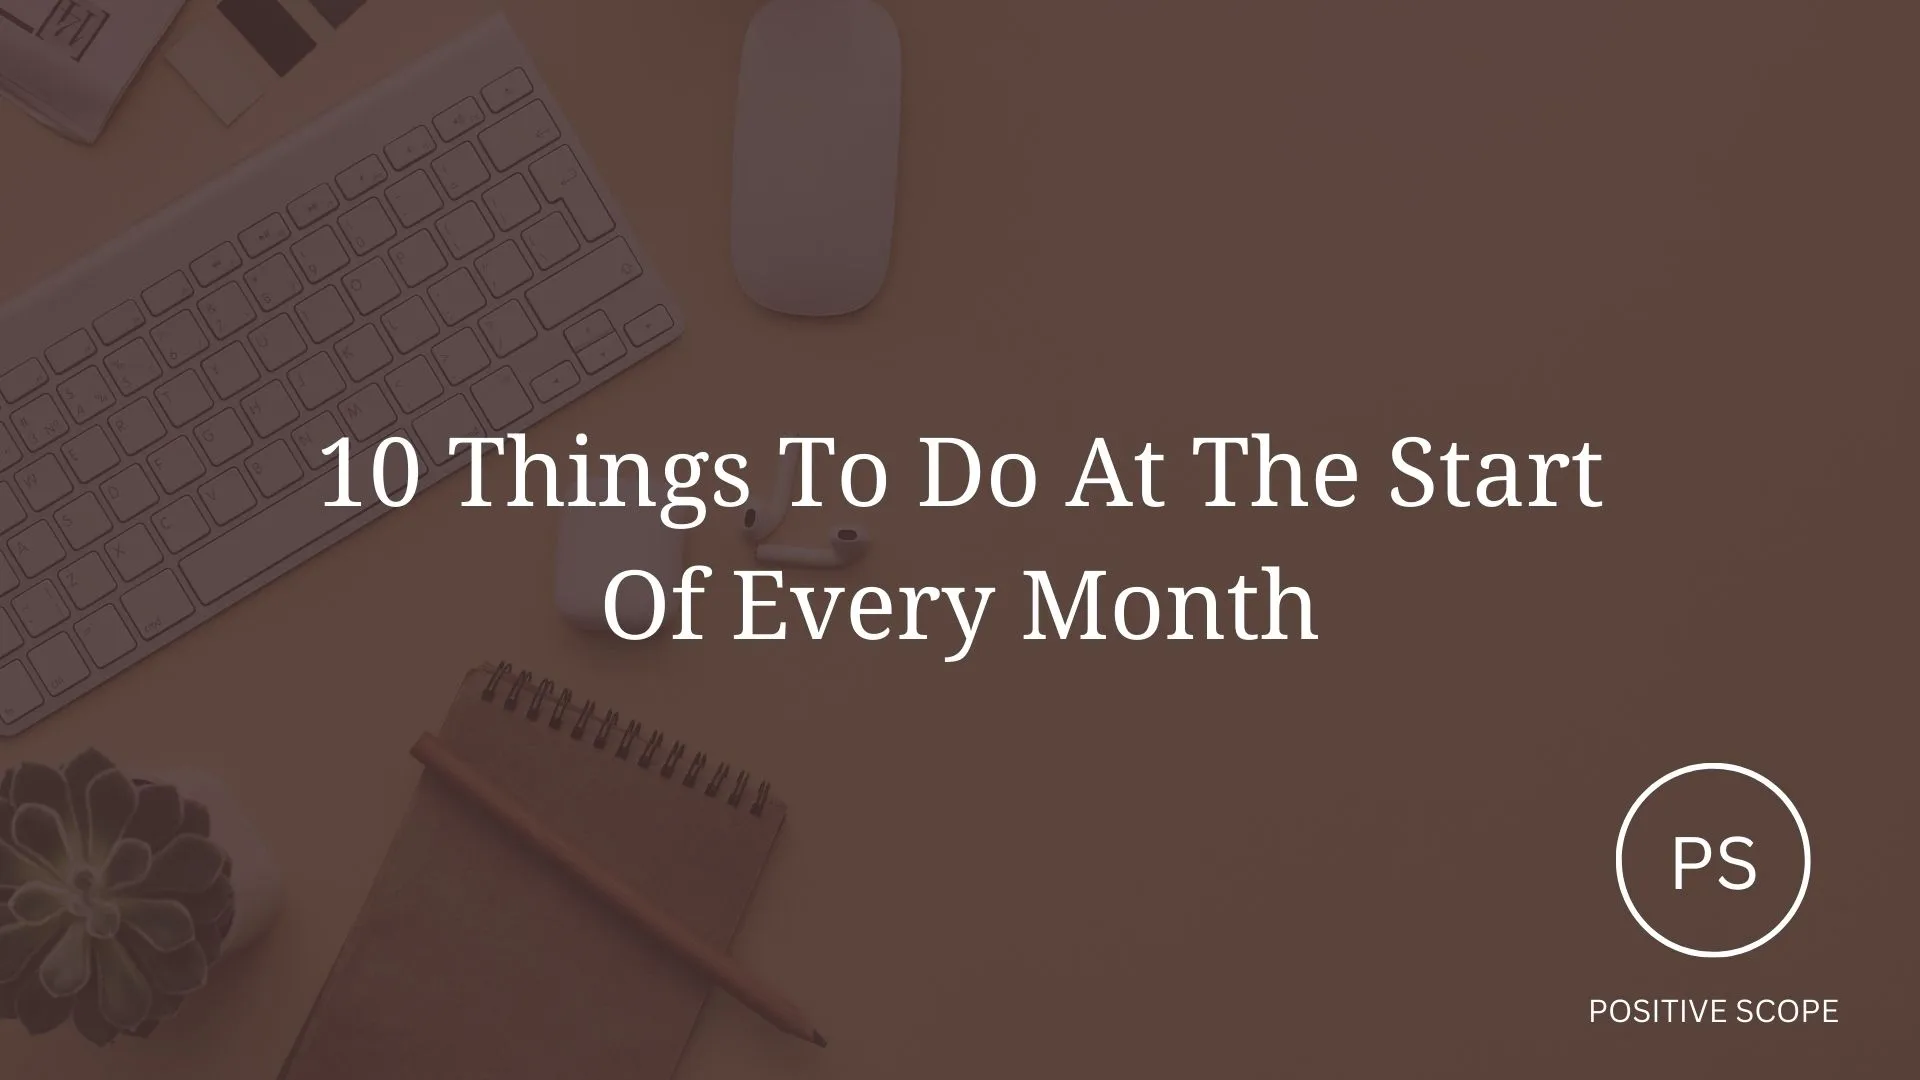 10 Things To Do At The Start Of Every Month